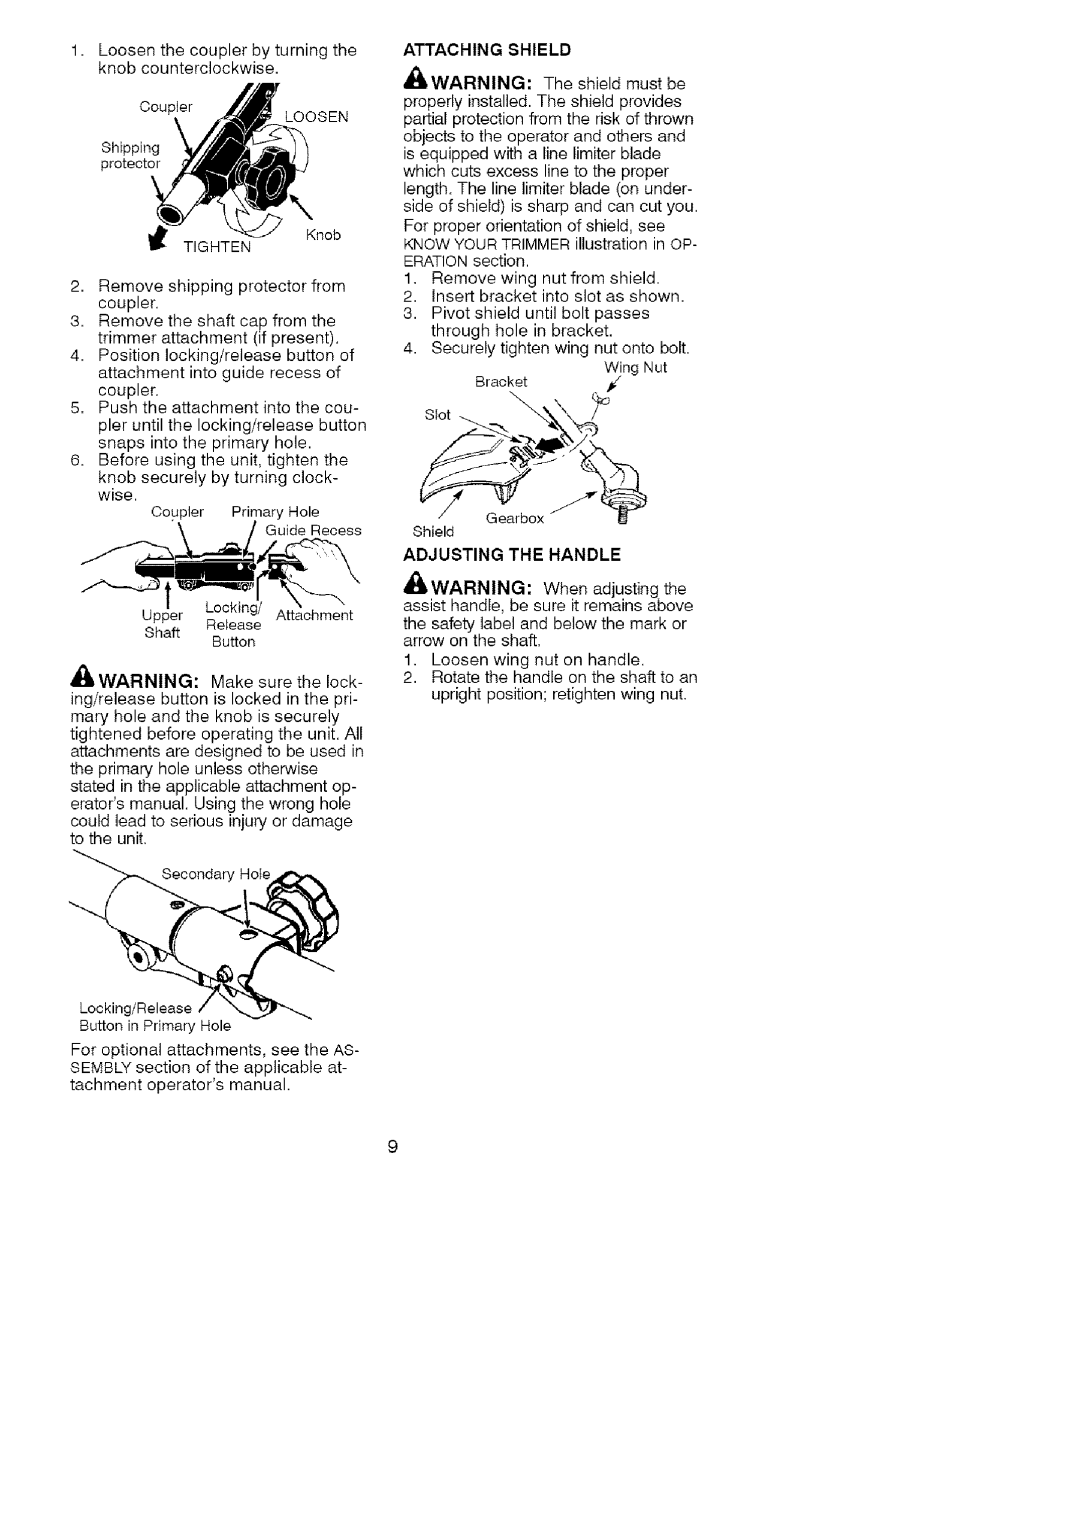 Craftsman 358.791071 operating instructions Attaching Shield, Adjusting The Handle 